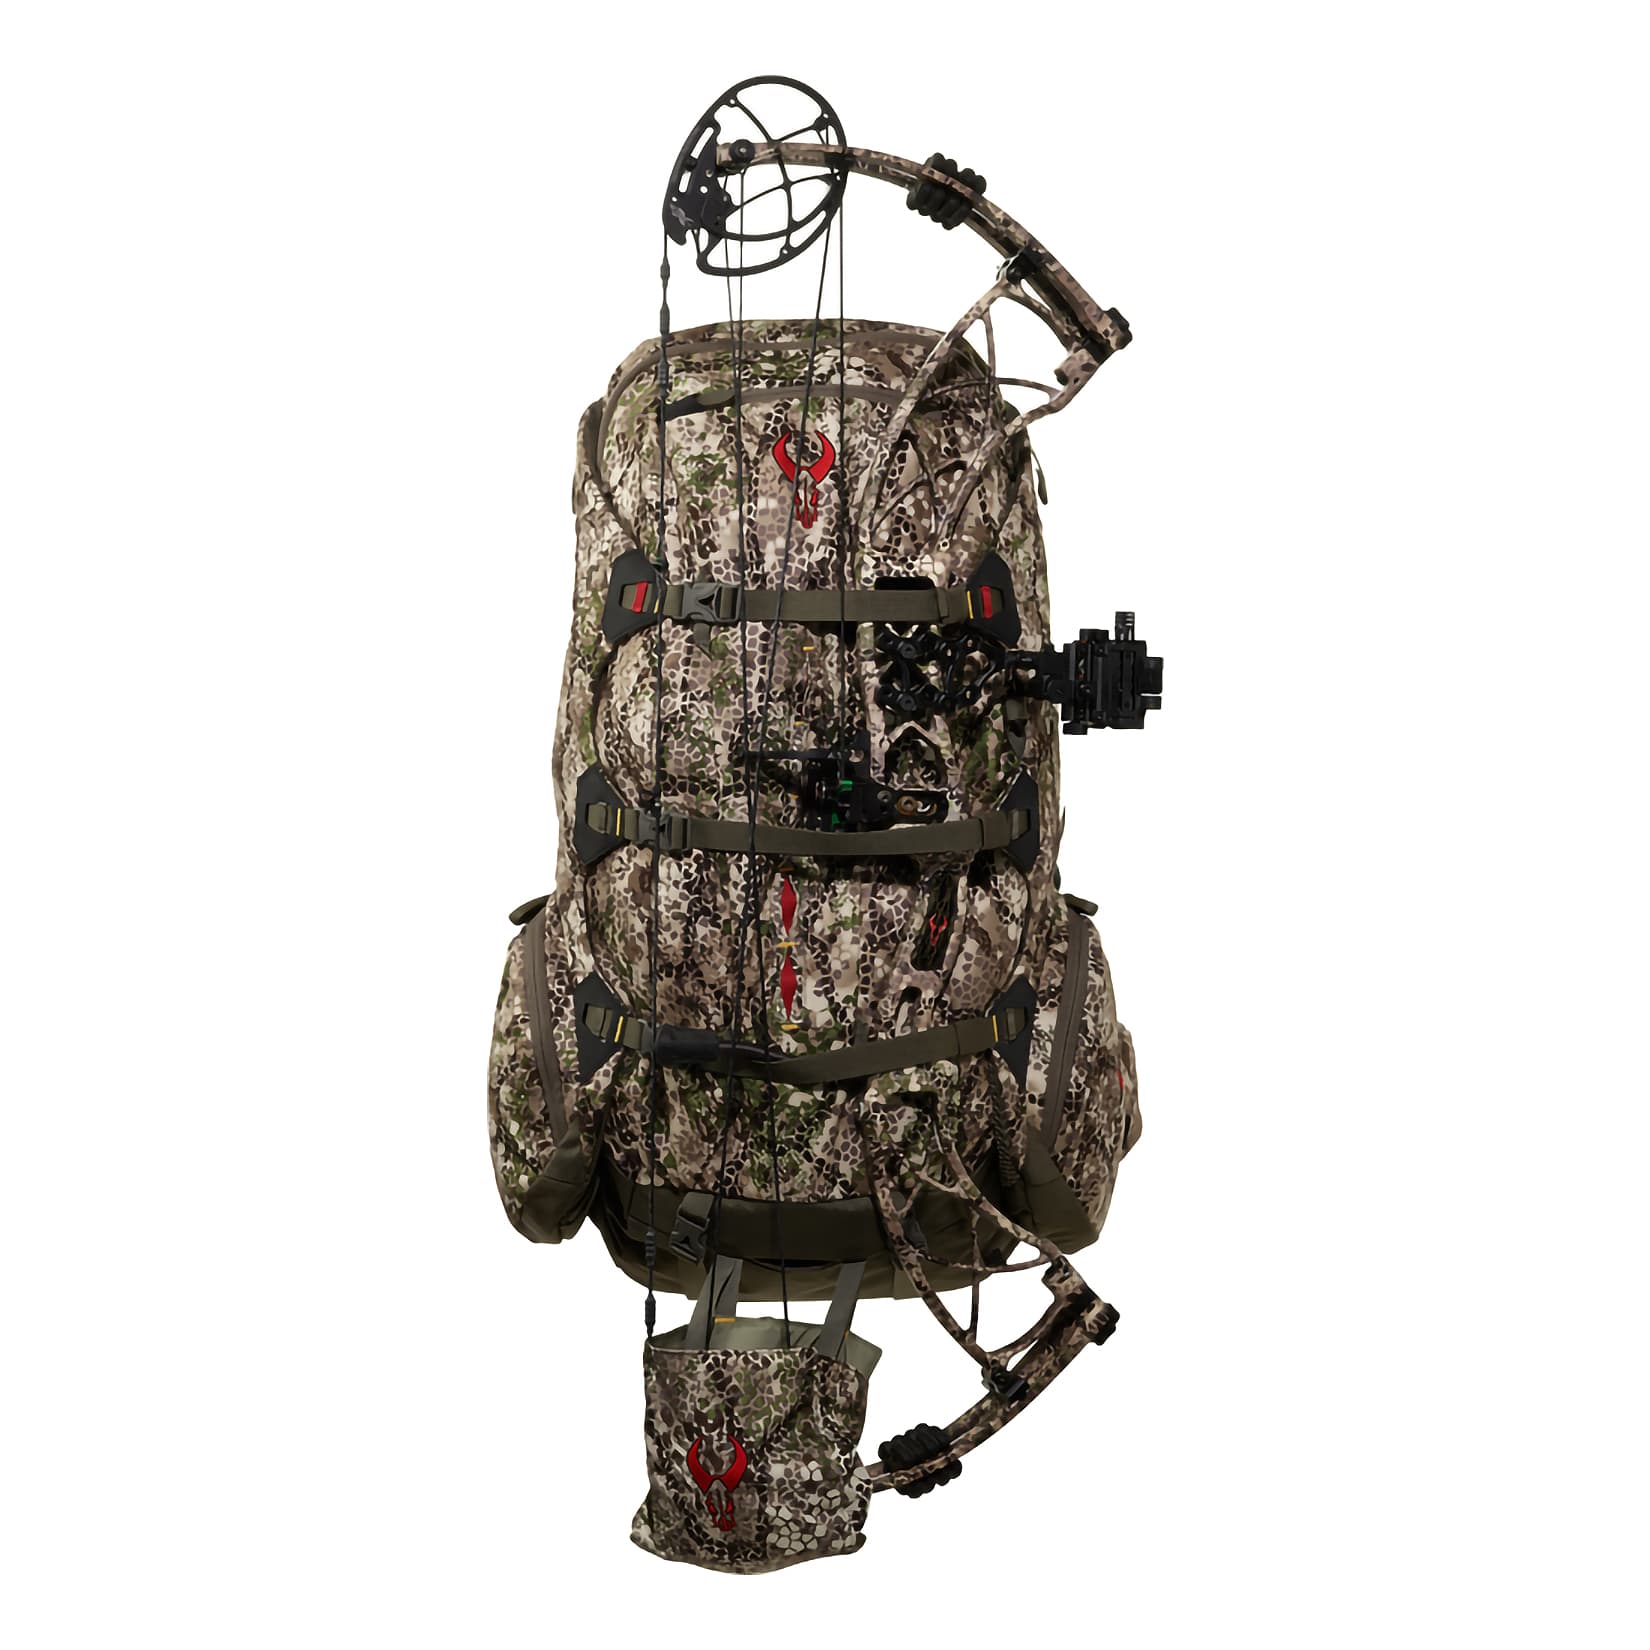 Badlands 2200 Hunting Pack - with bow/rifle boot